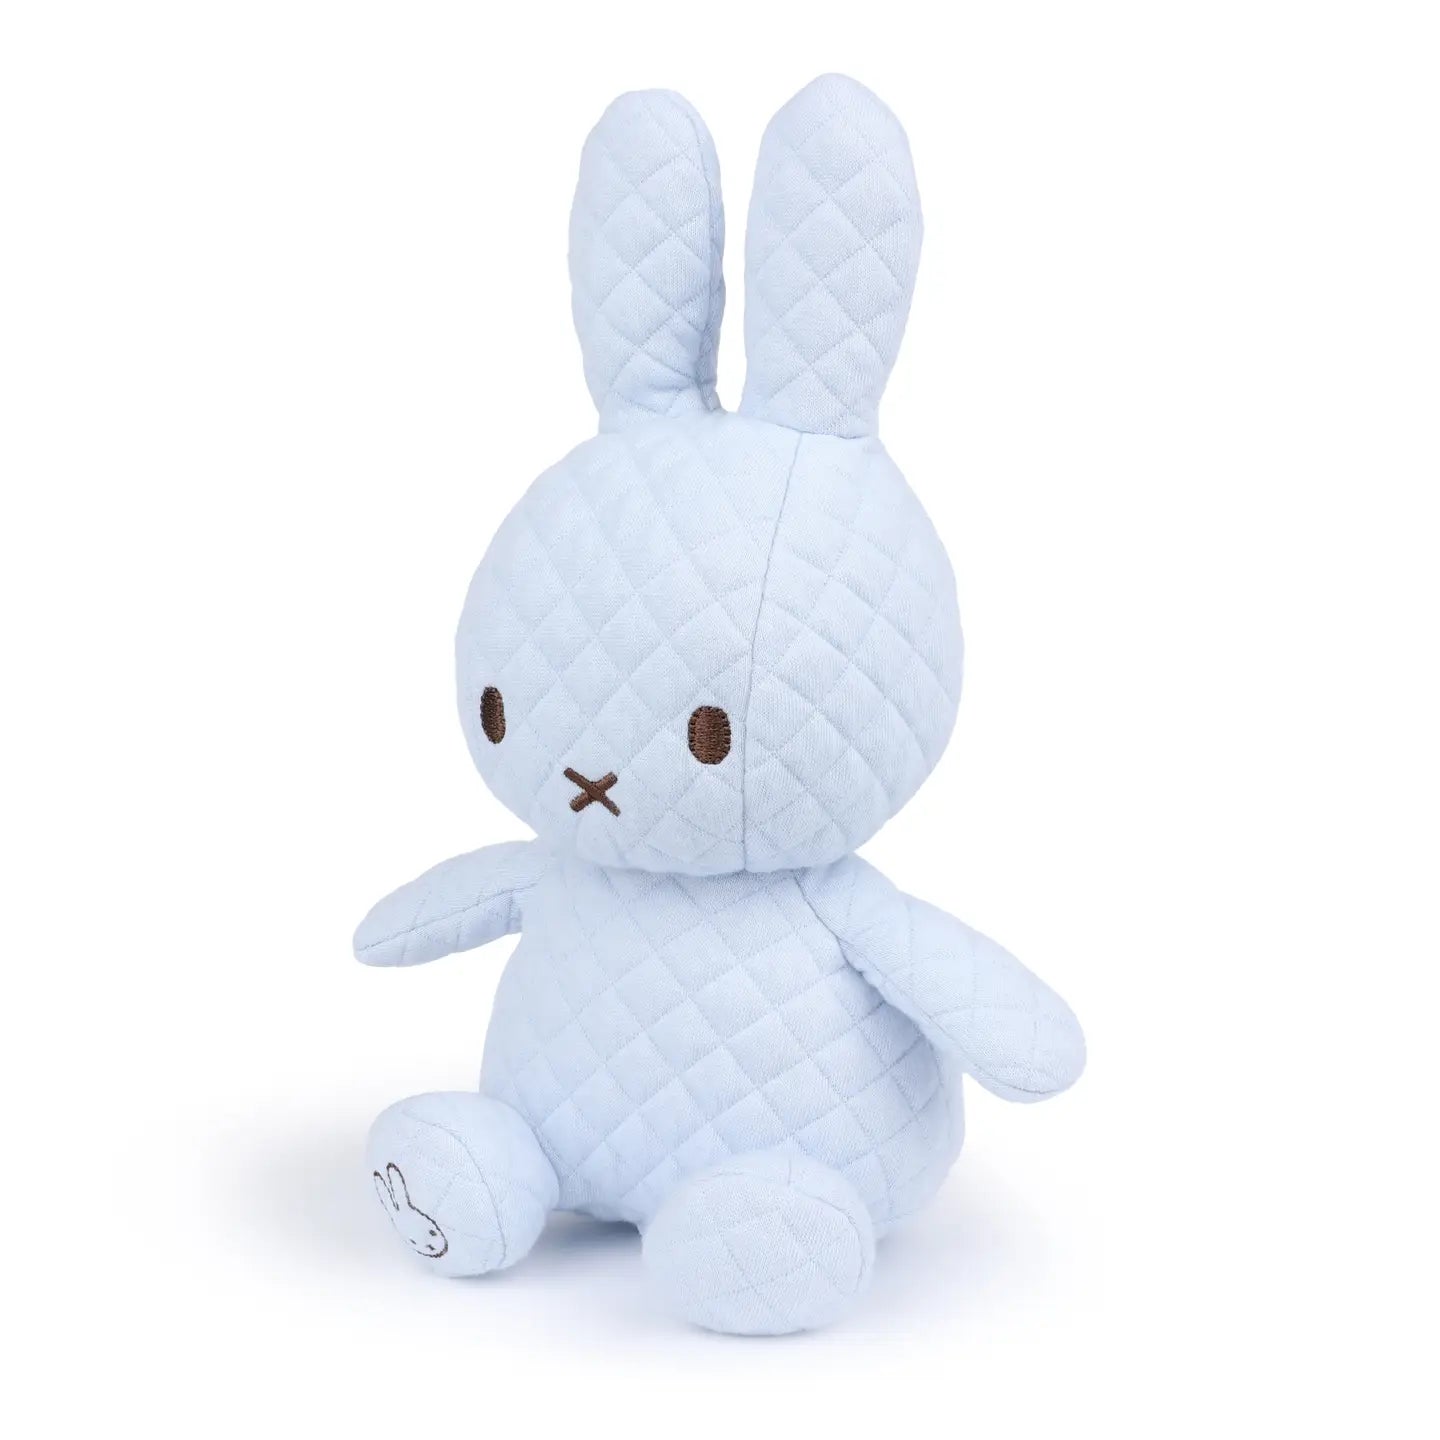 Miffy Quilted Bonbon Blue in Giftbox 23cm